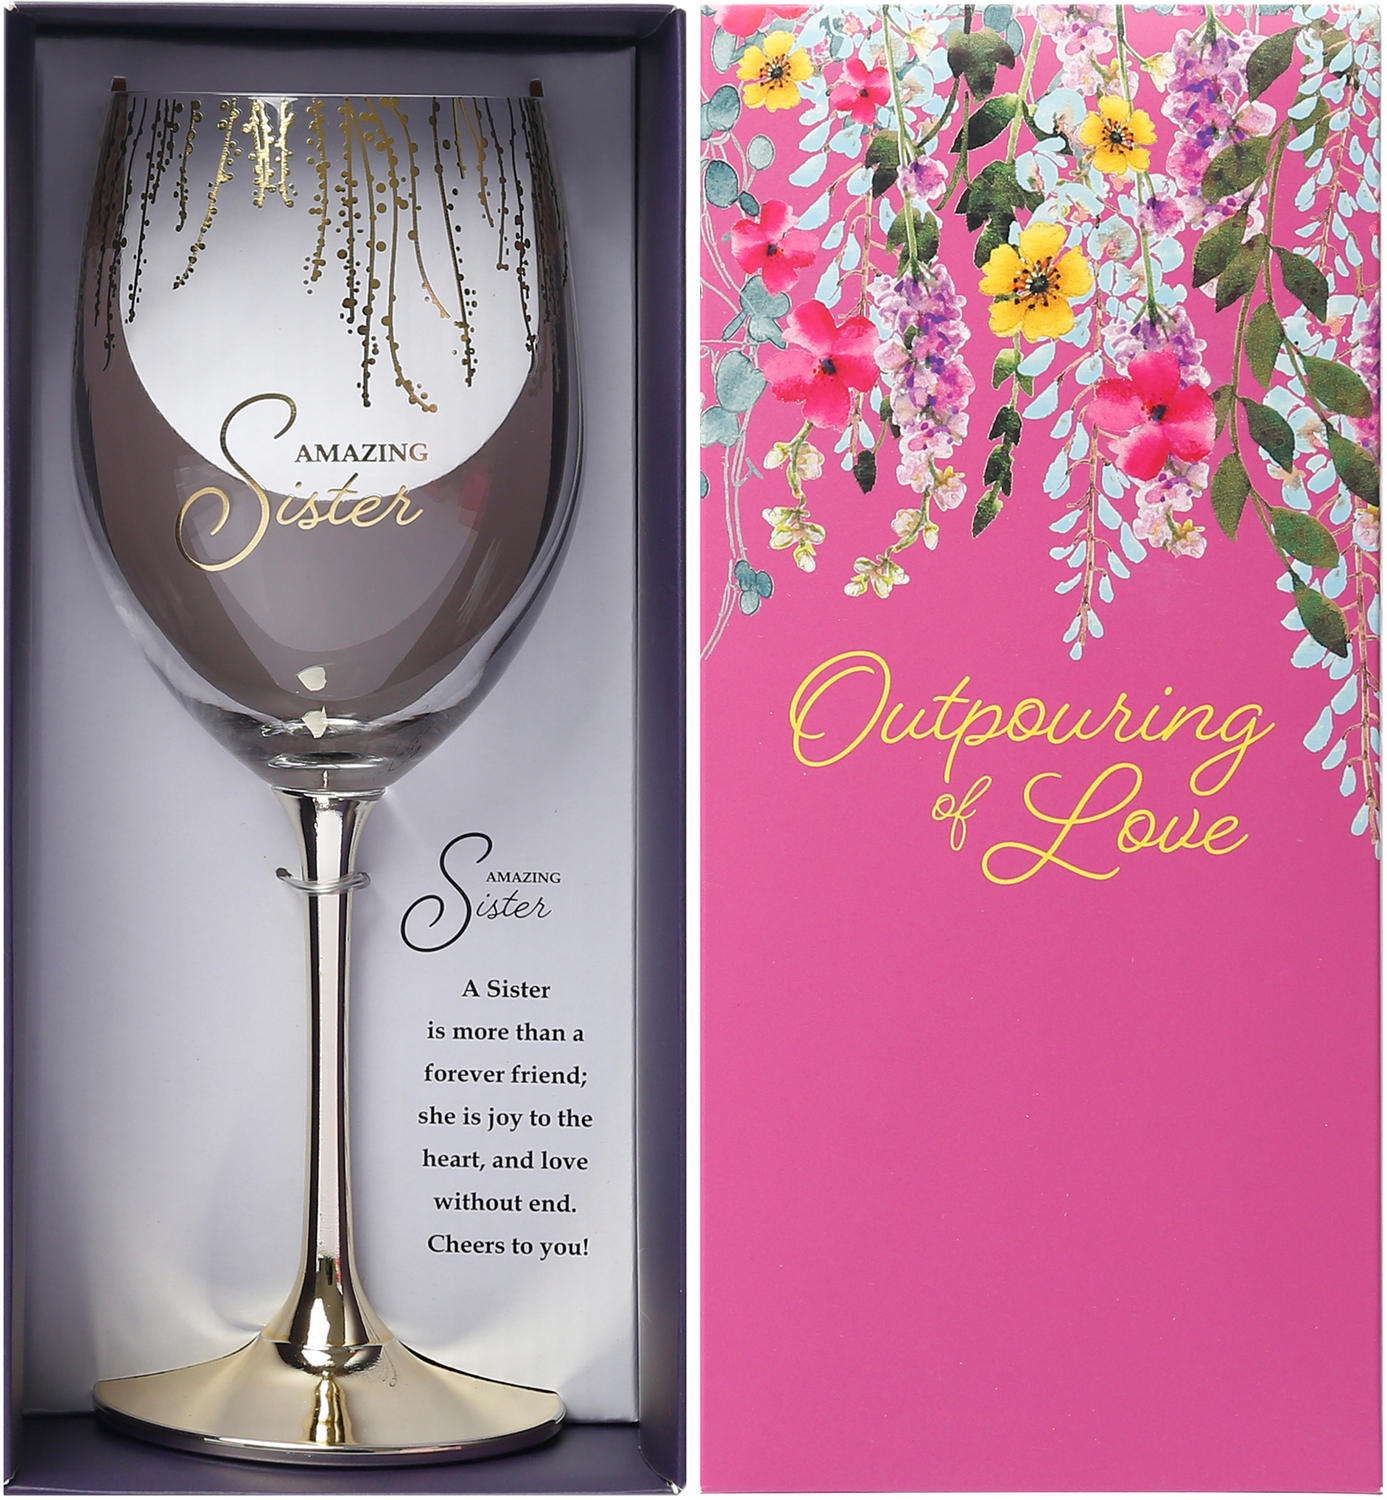 Sister by Outpouring of Love - Sister - Gift Boxed 19 oz Crystal Wine Glass